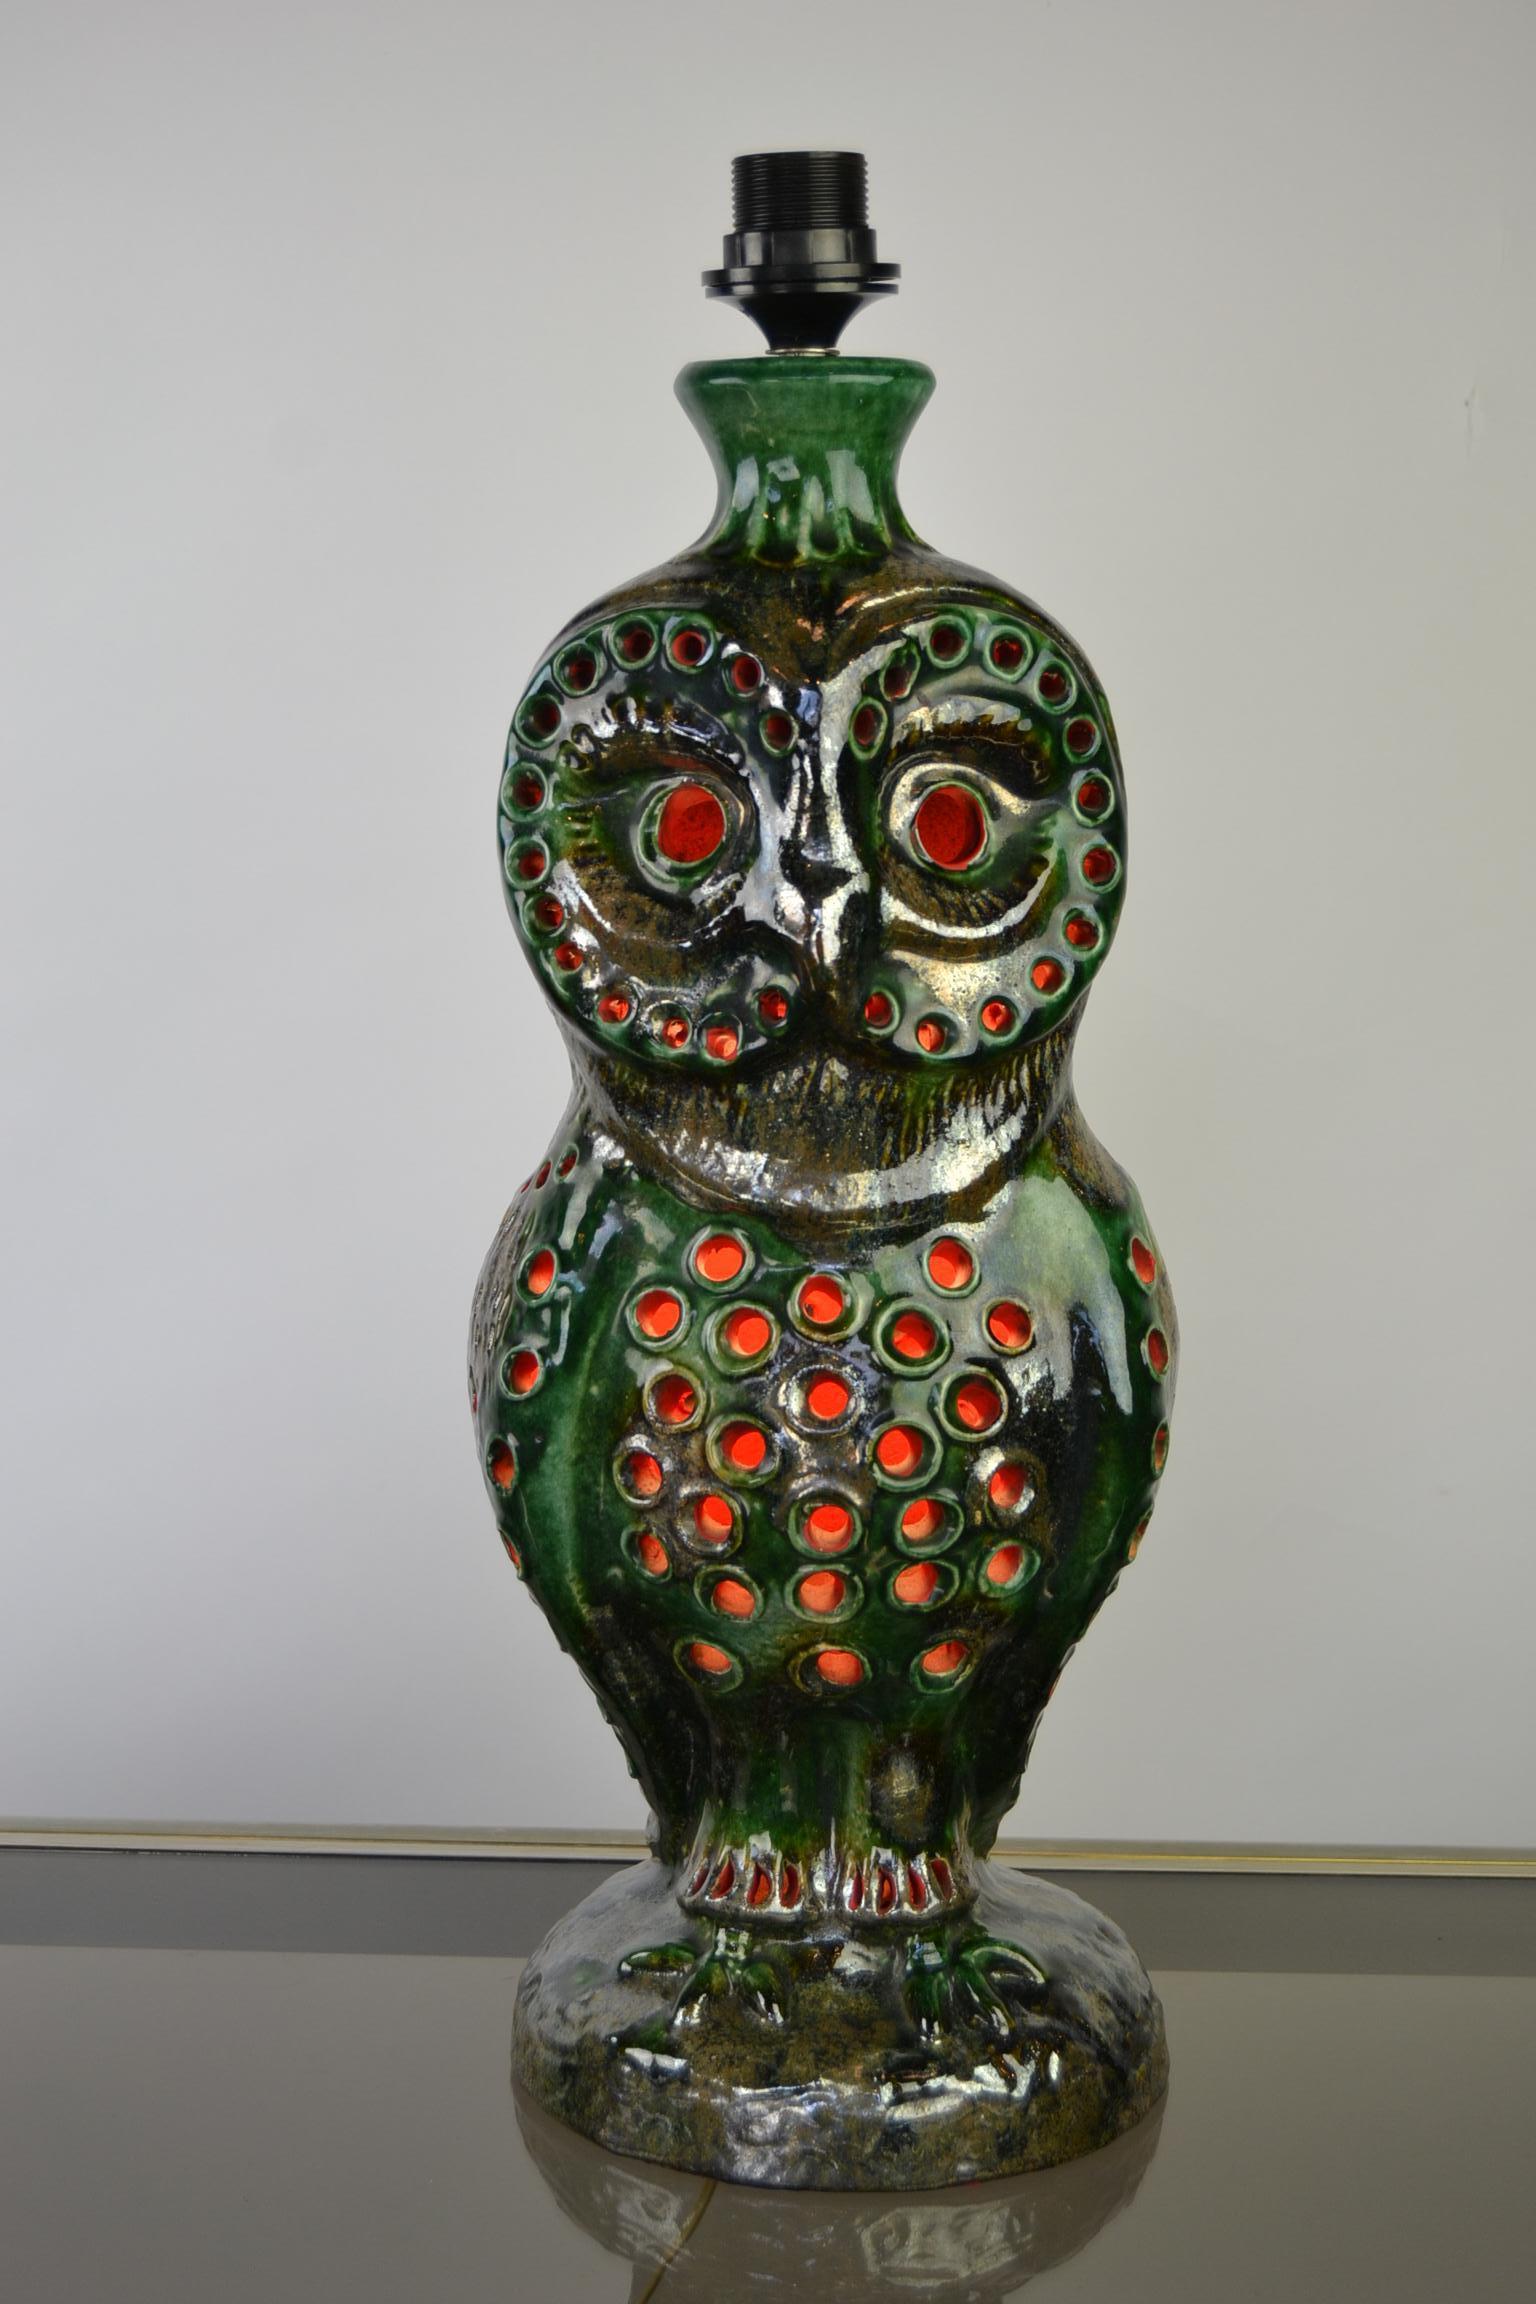 Vintage large ceramic table lamp or floor light in the shape of an owl.
This 1970s Bird Light has the colors green, brown, orange and a gold, bronze and silver touch.
Has 2 fittings E27, 1 on top of the owl figurine, 1 inside to give special light